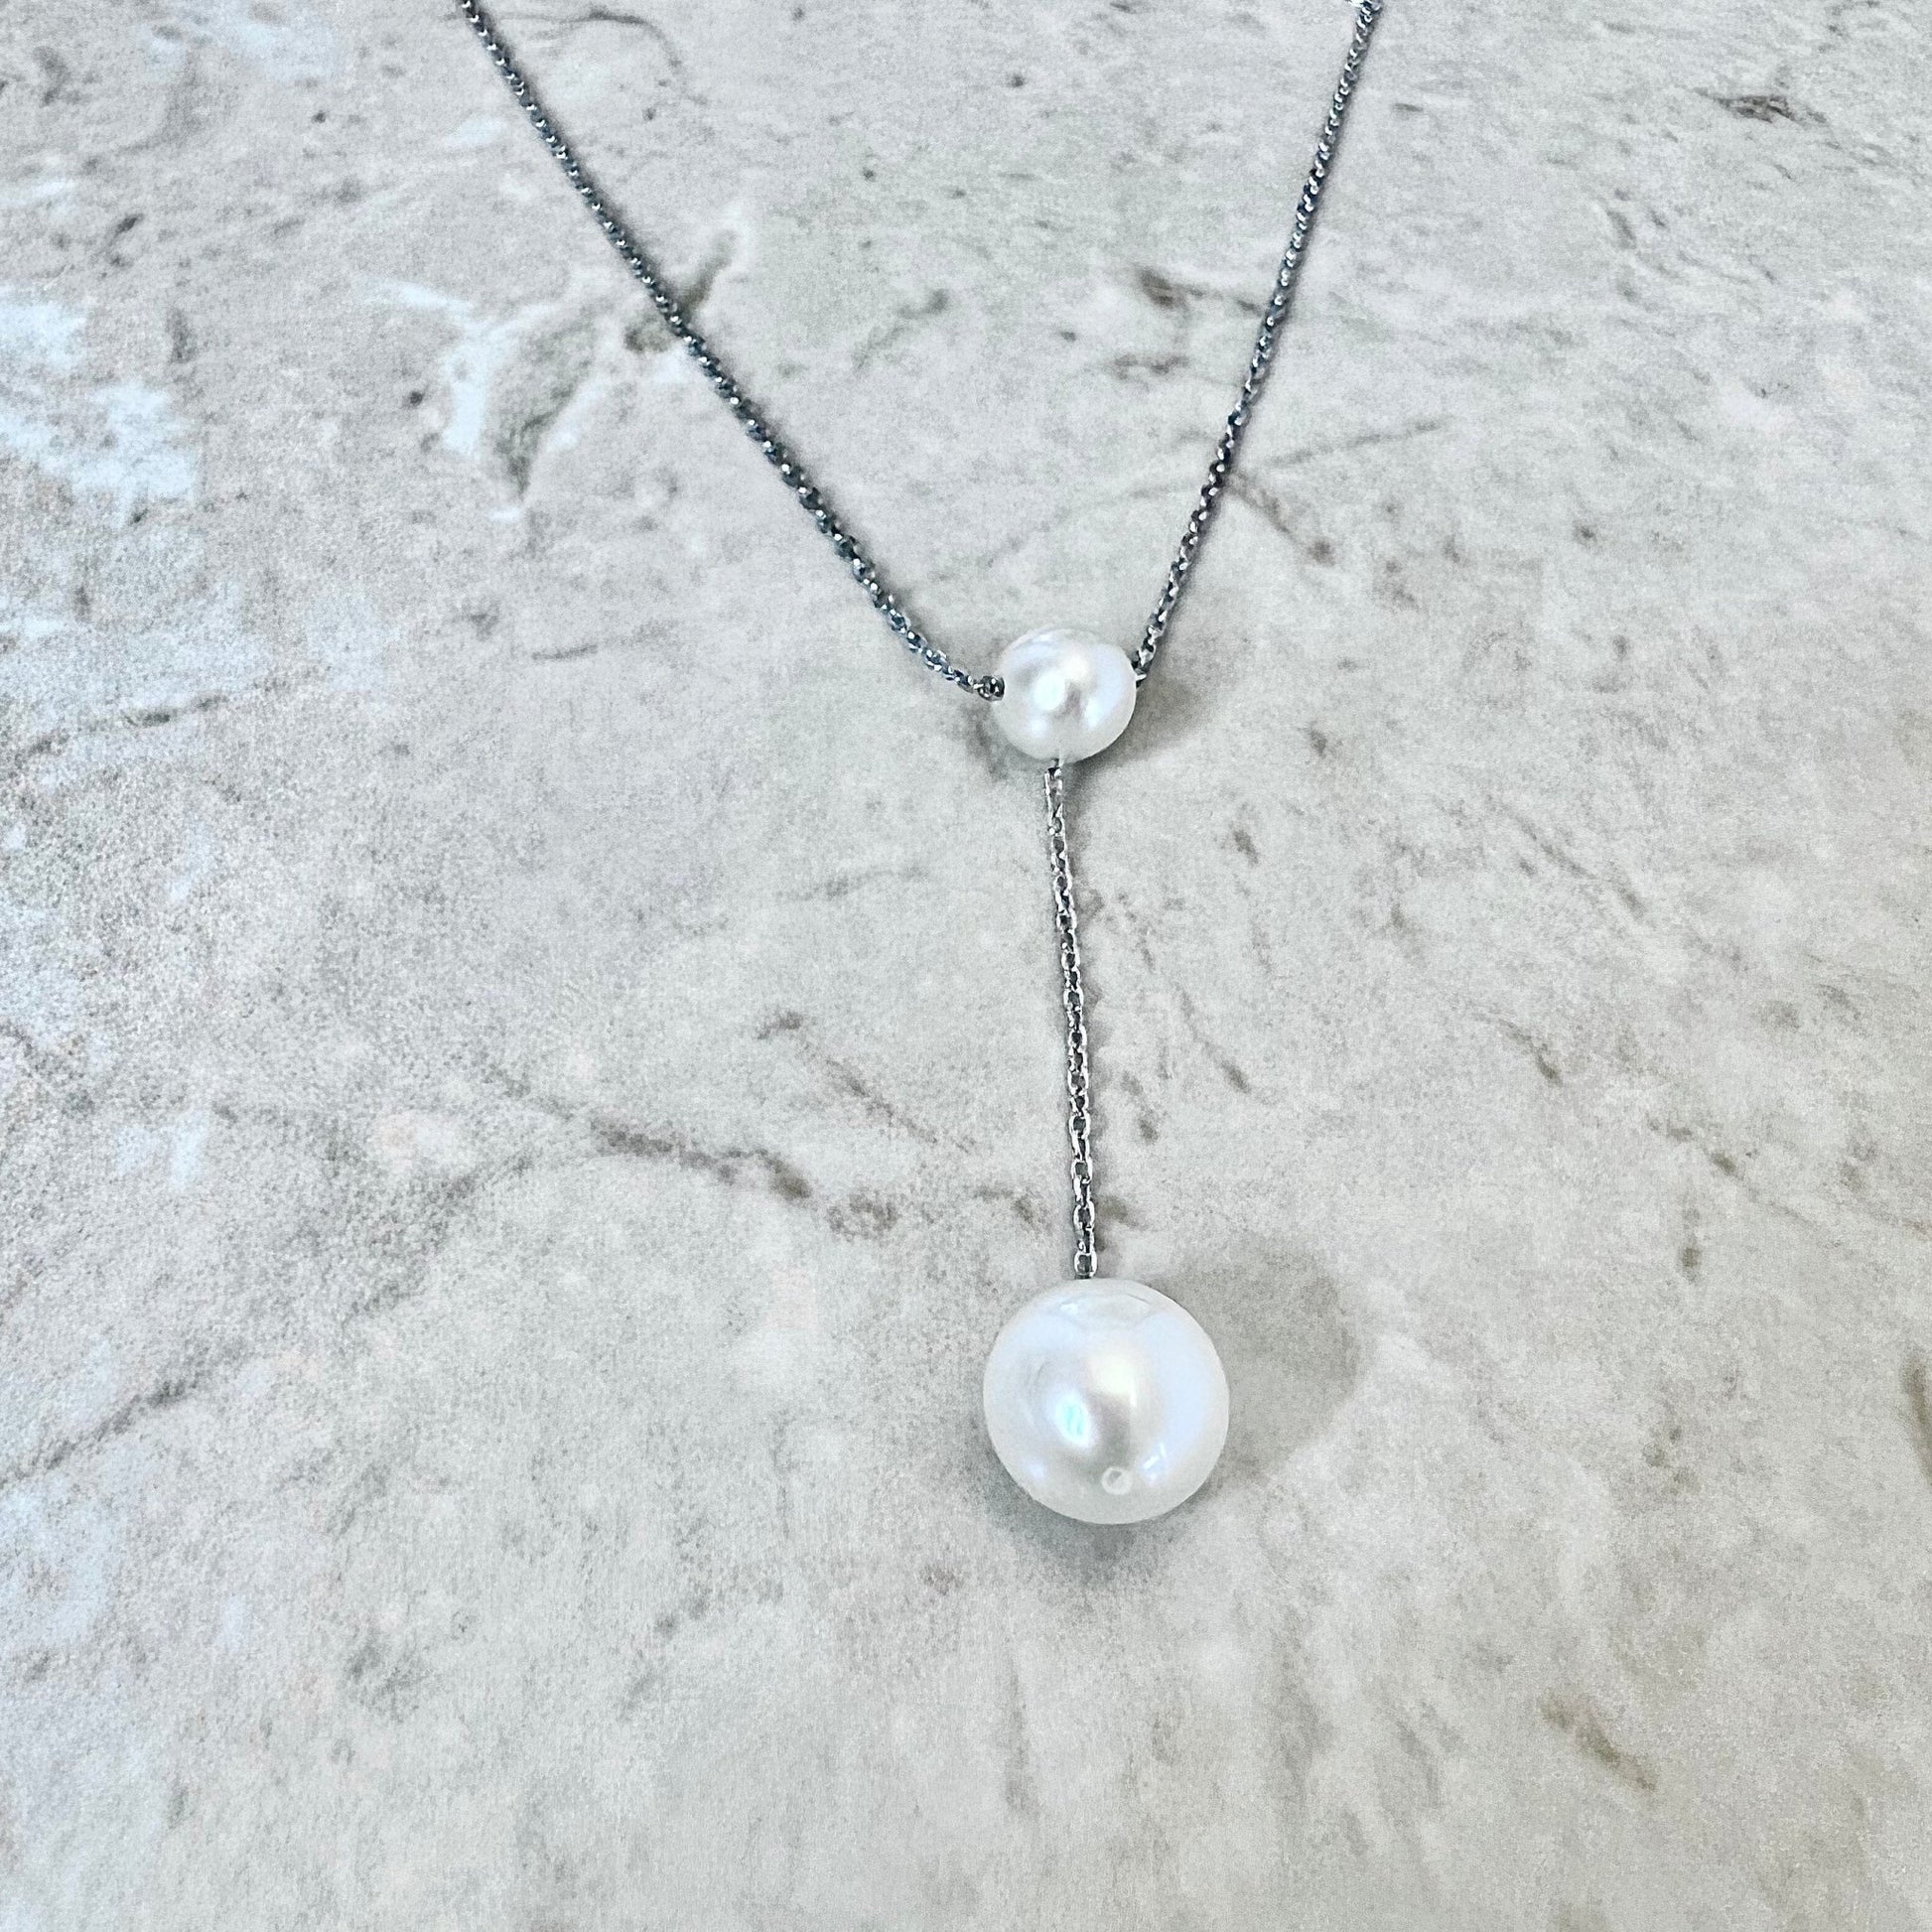 Sterling Silver White Pearl Lariat Necklace - Genuine Pearl Necklace - Pearl Lariat Pendant Necklace - Birthday Gift - June Birthstone